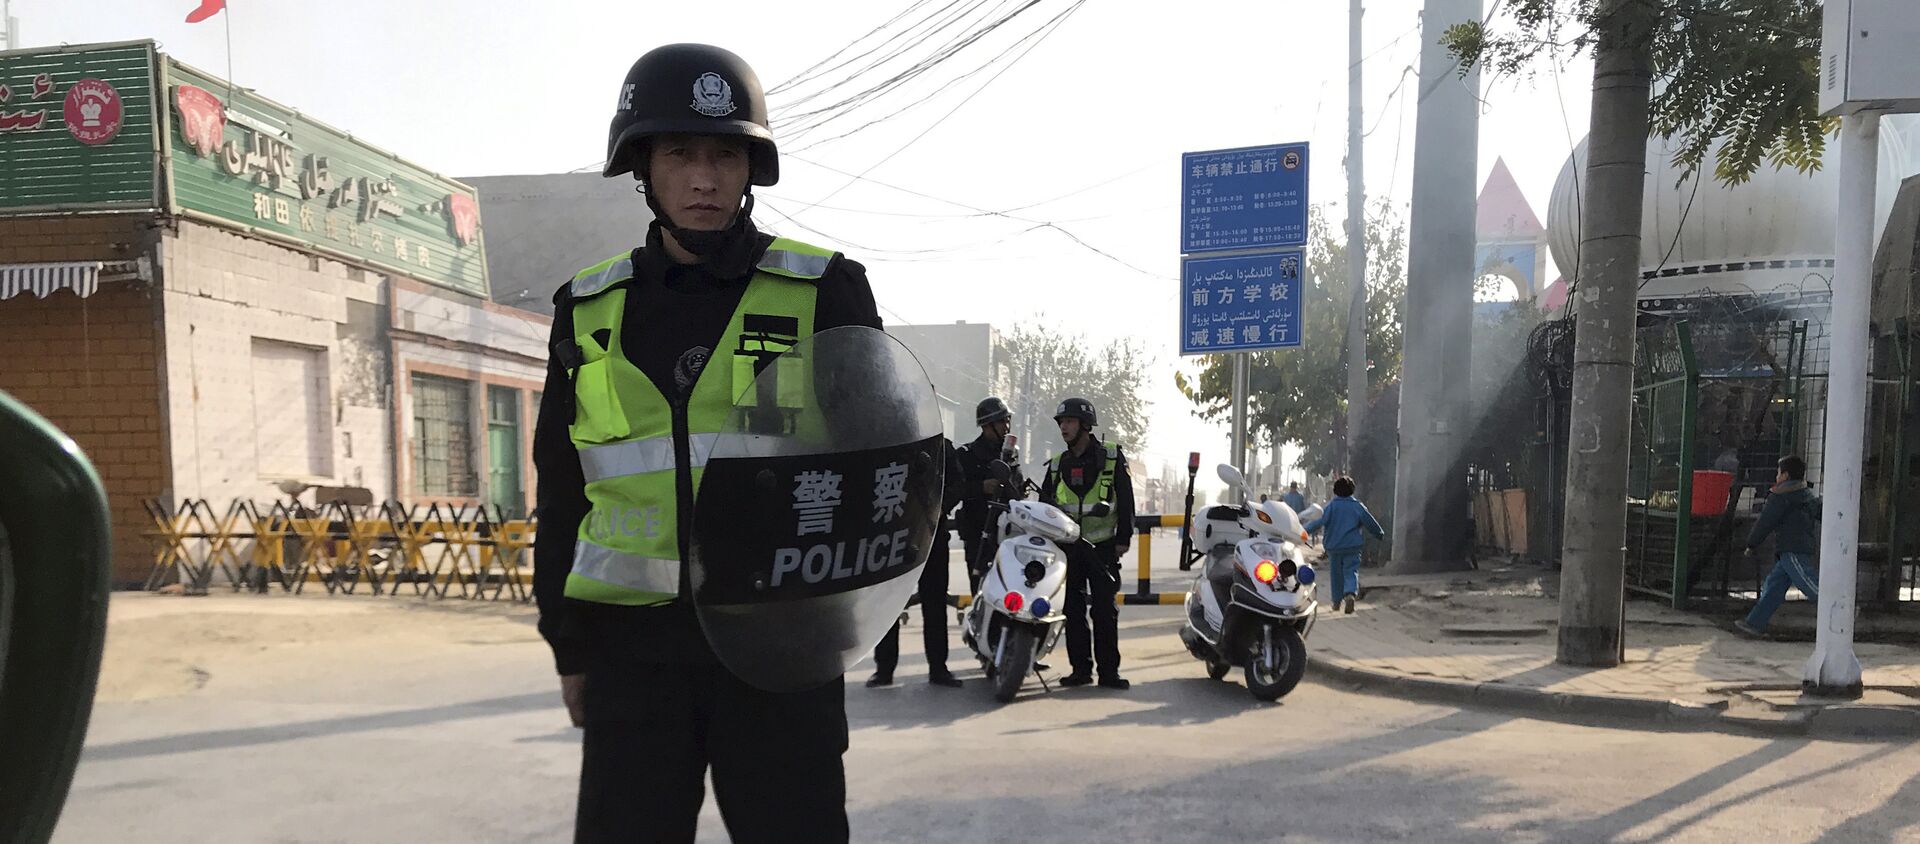 (File) In this Nov. 2, 2017 photo, a police personnel holding shield and baton guards a security post leading into a center believed to be used for re-education in Korla in western China's Xinjiang region - Sputnik International, 1920, 06.09.2018